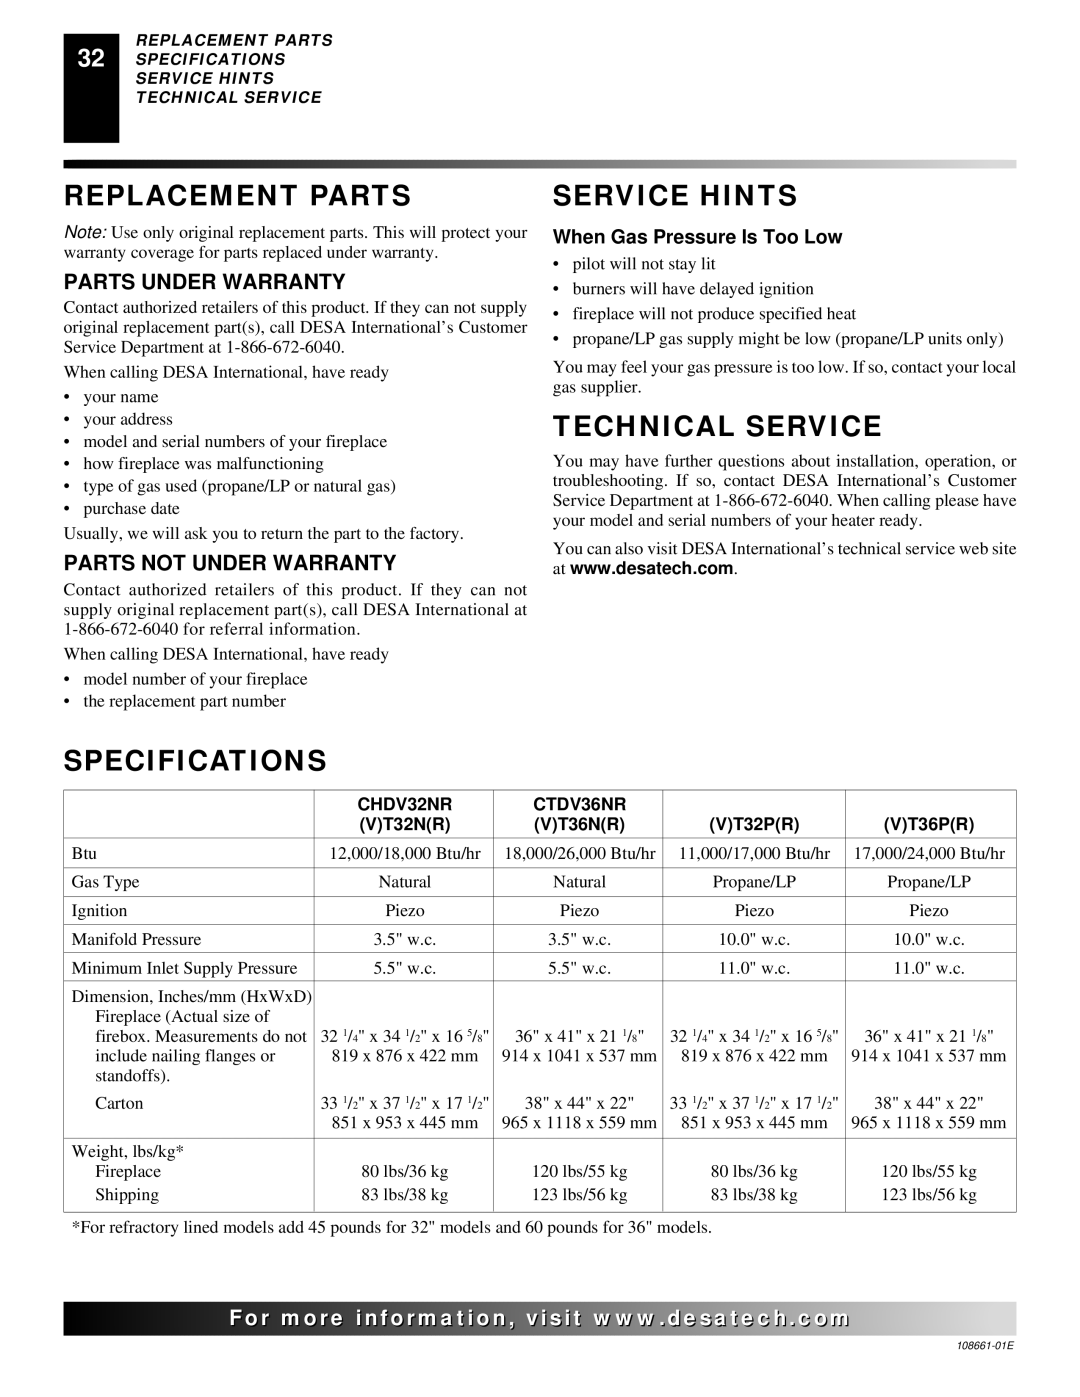 Desa (V)VC36N Series installation manual Replacement Parts, Service Hints, Technical Service, Specifications 